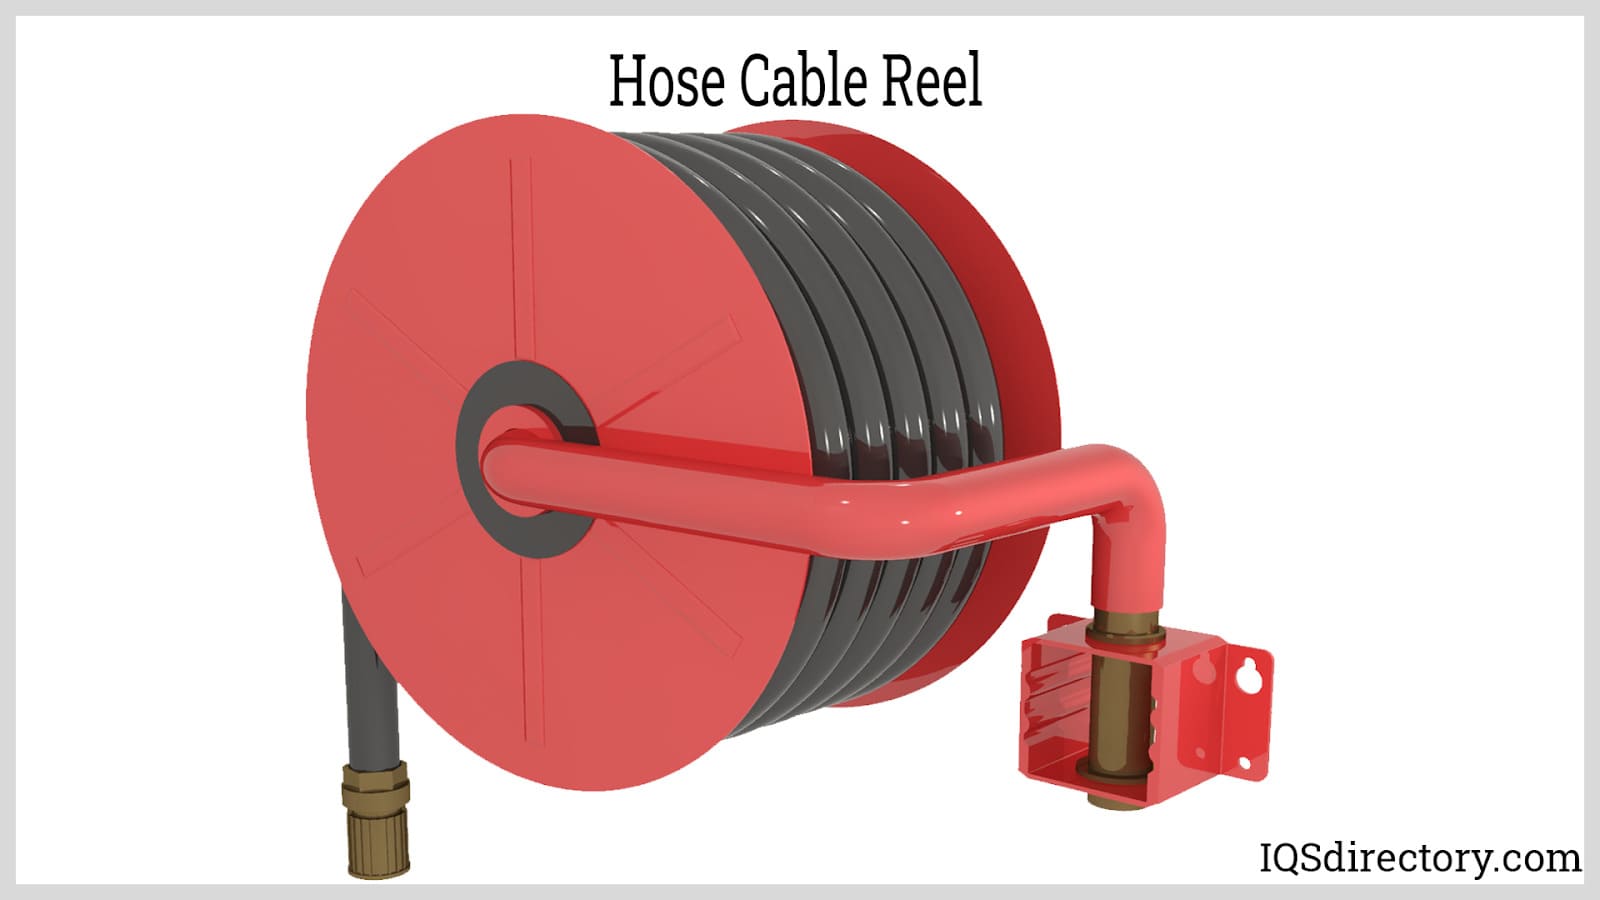 Hose Cable Reel